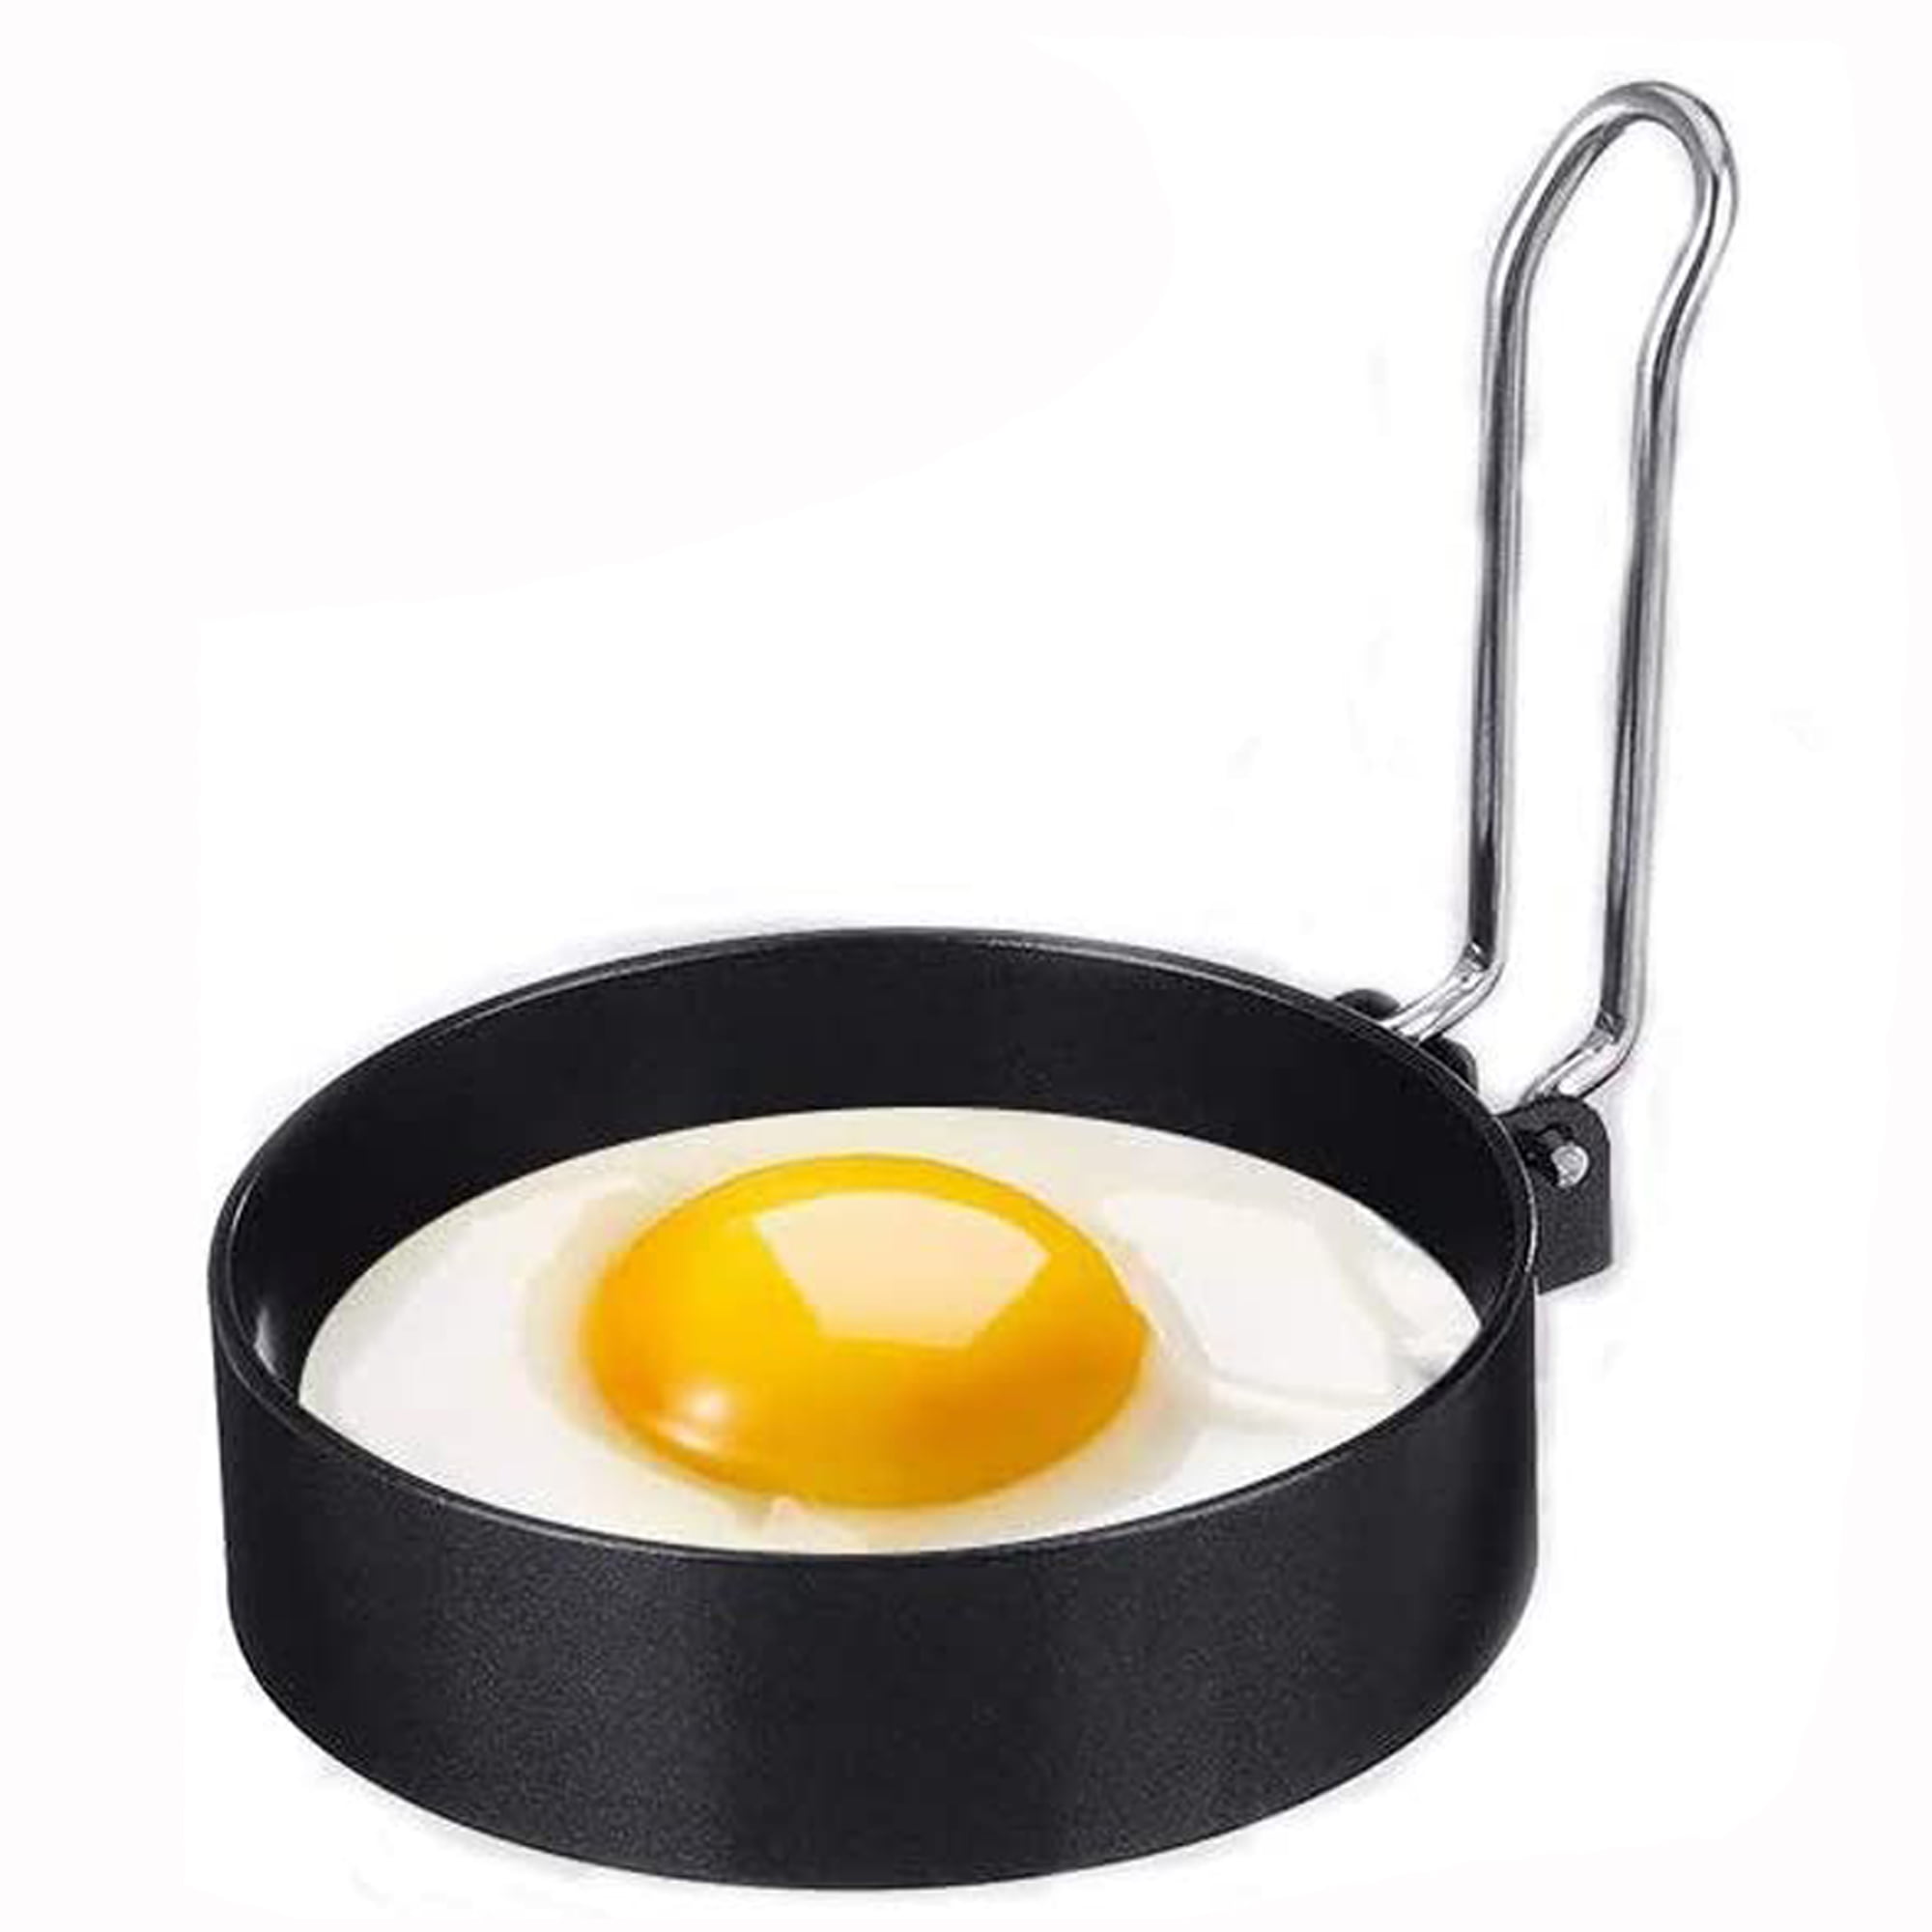 1Pcs Fried Egg Non Stick Stainless Steel Pancake Ring Mold Cooking Kitchen Tools 